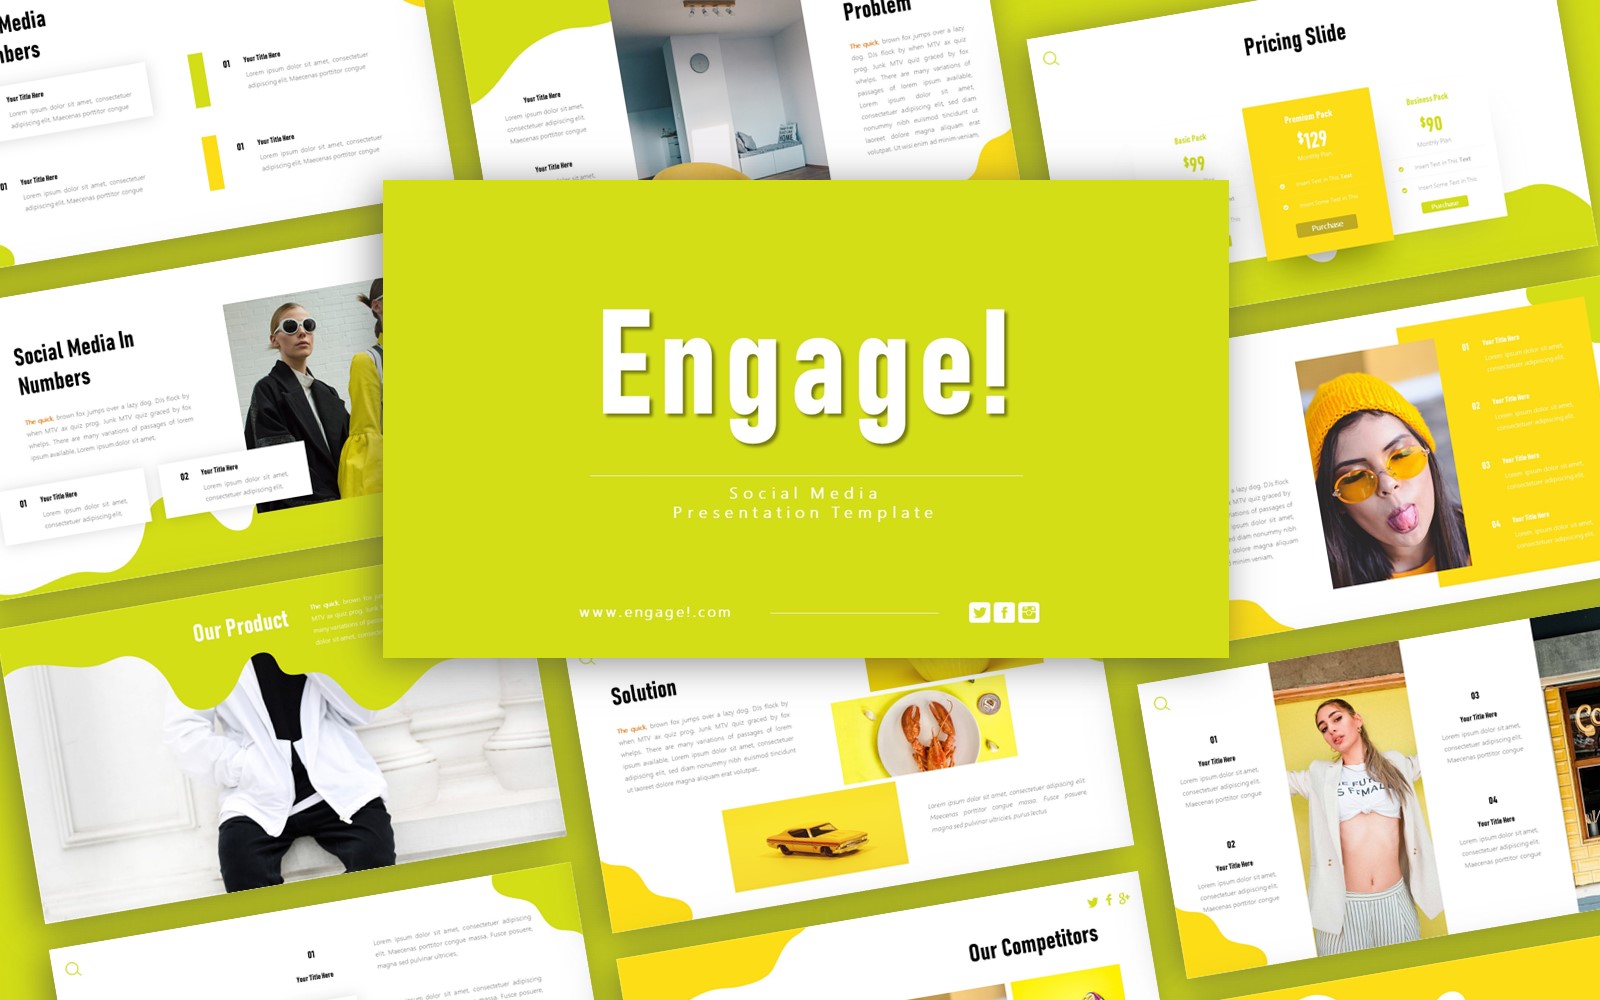 Engage Social Media Presentation PowerPoint template